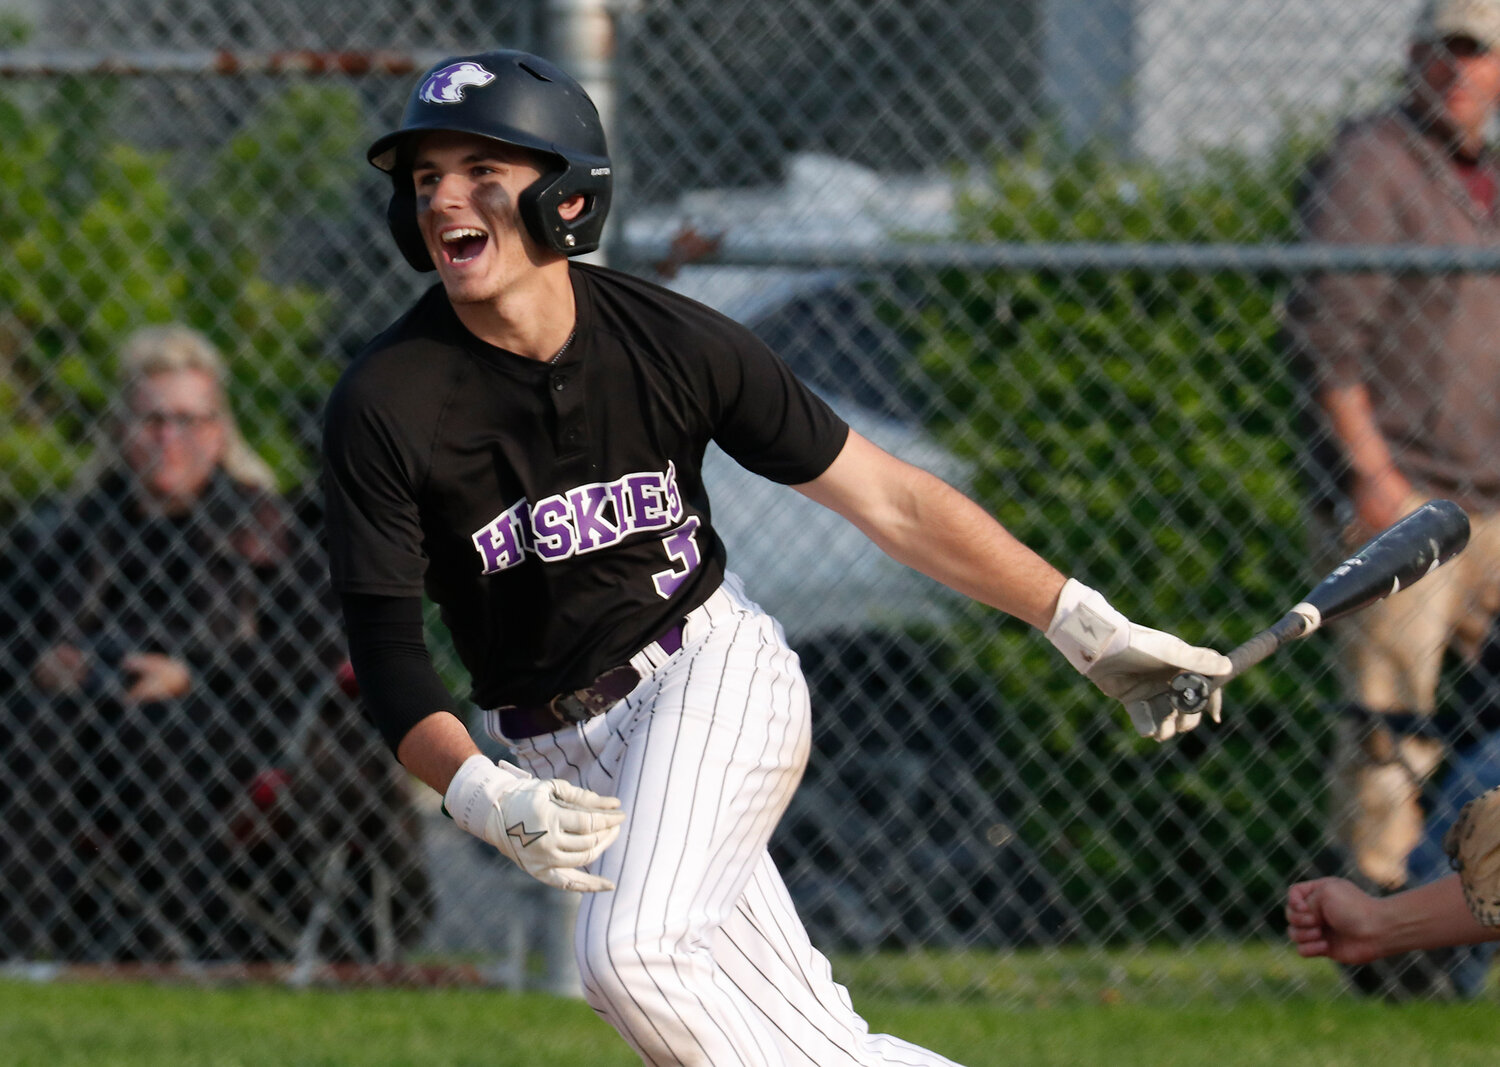 Parker Camelo winces as he smashed a grounder to shortstop for the third out of the 6th inning.